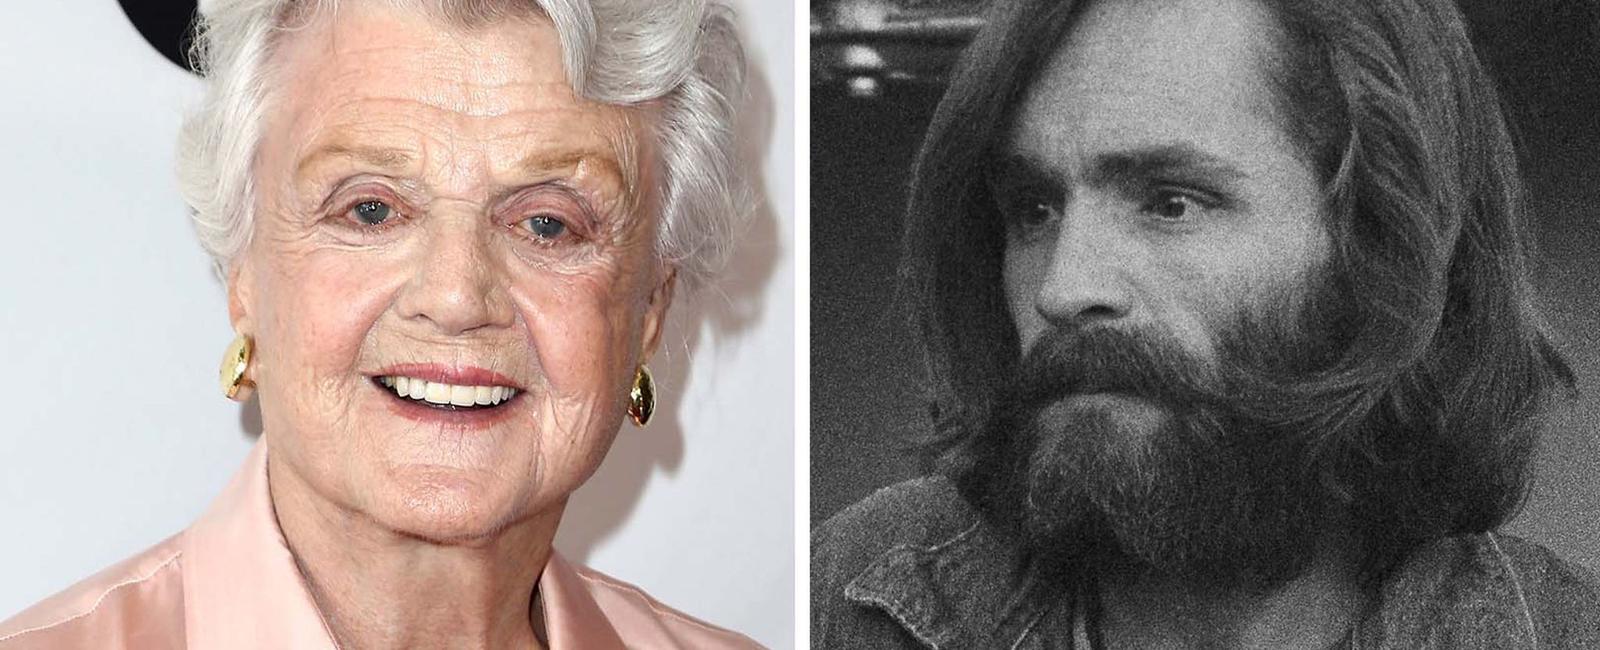 Angela lansbury moved her entire family to ireland after her daughter became involved with the manson family and her son got addicted to drugs she claims it saved their lives